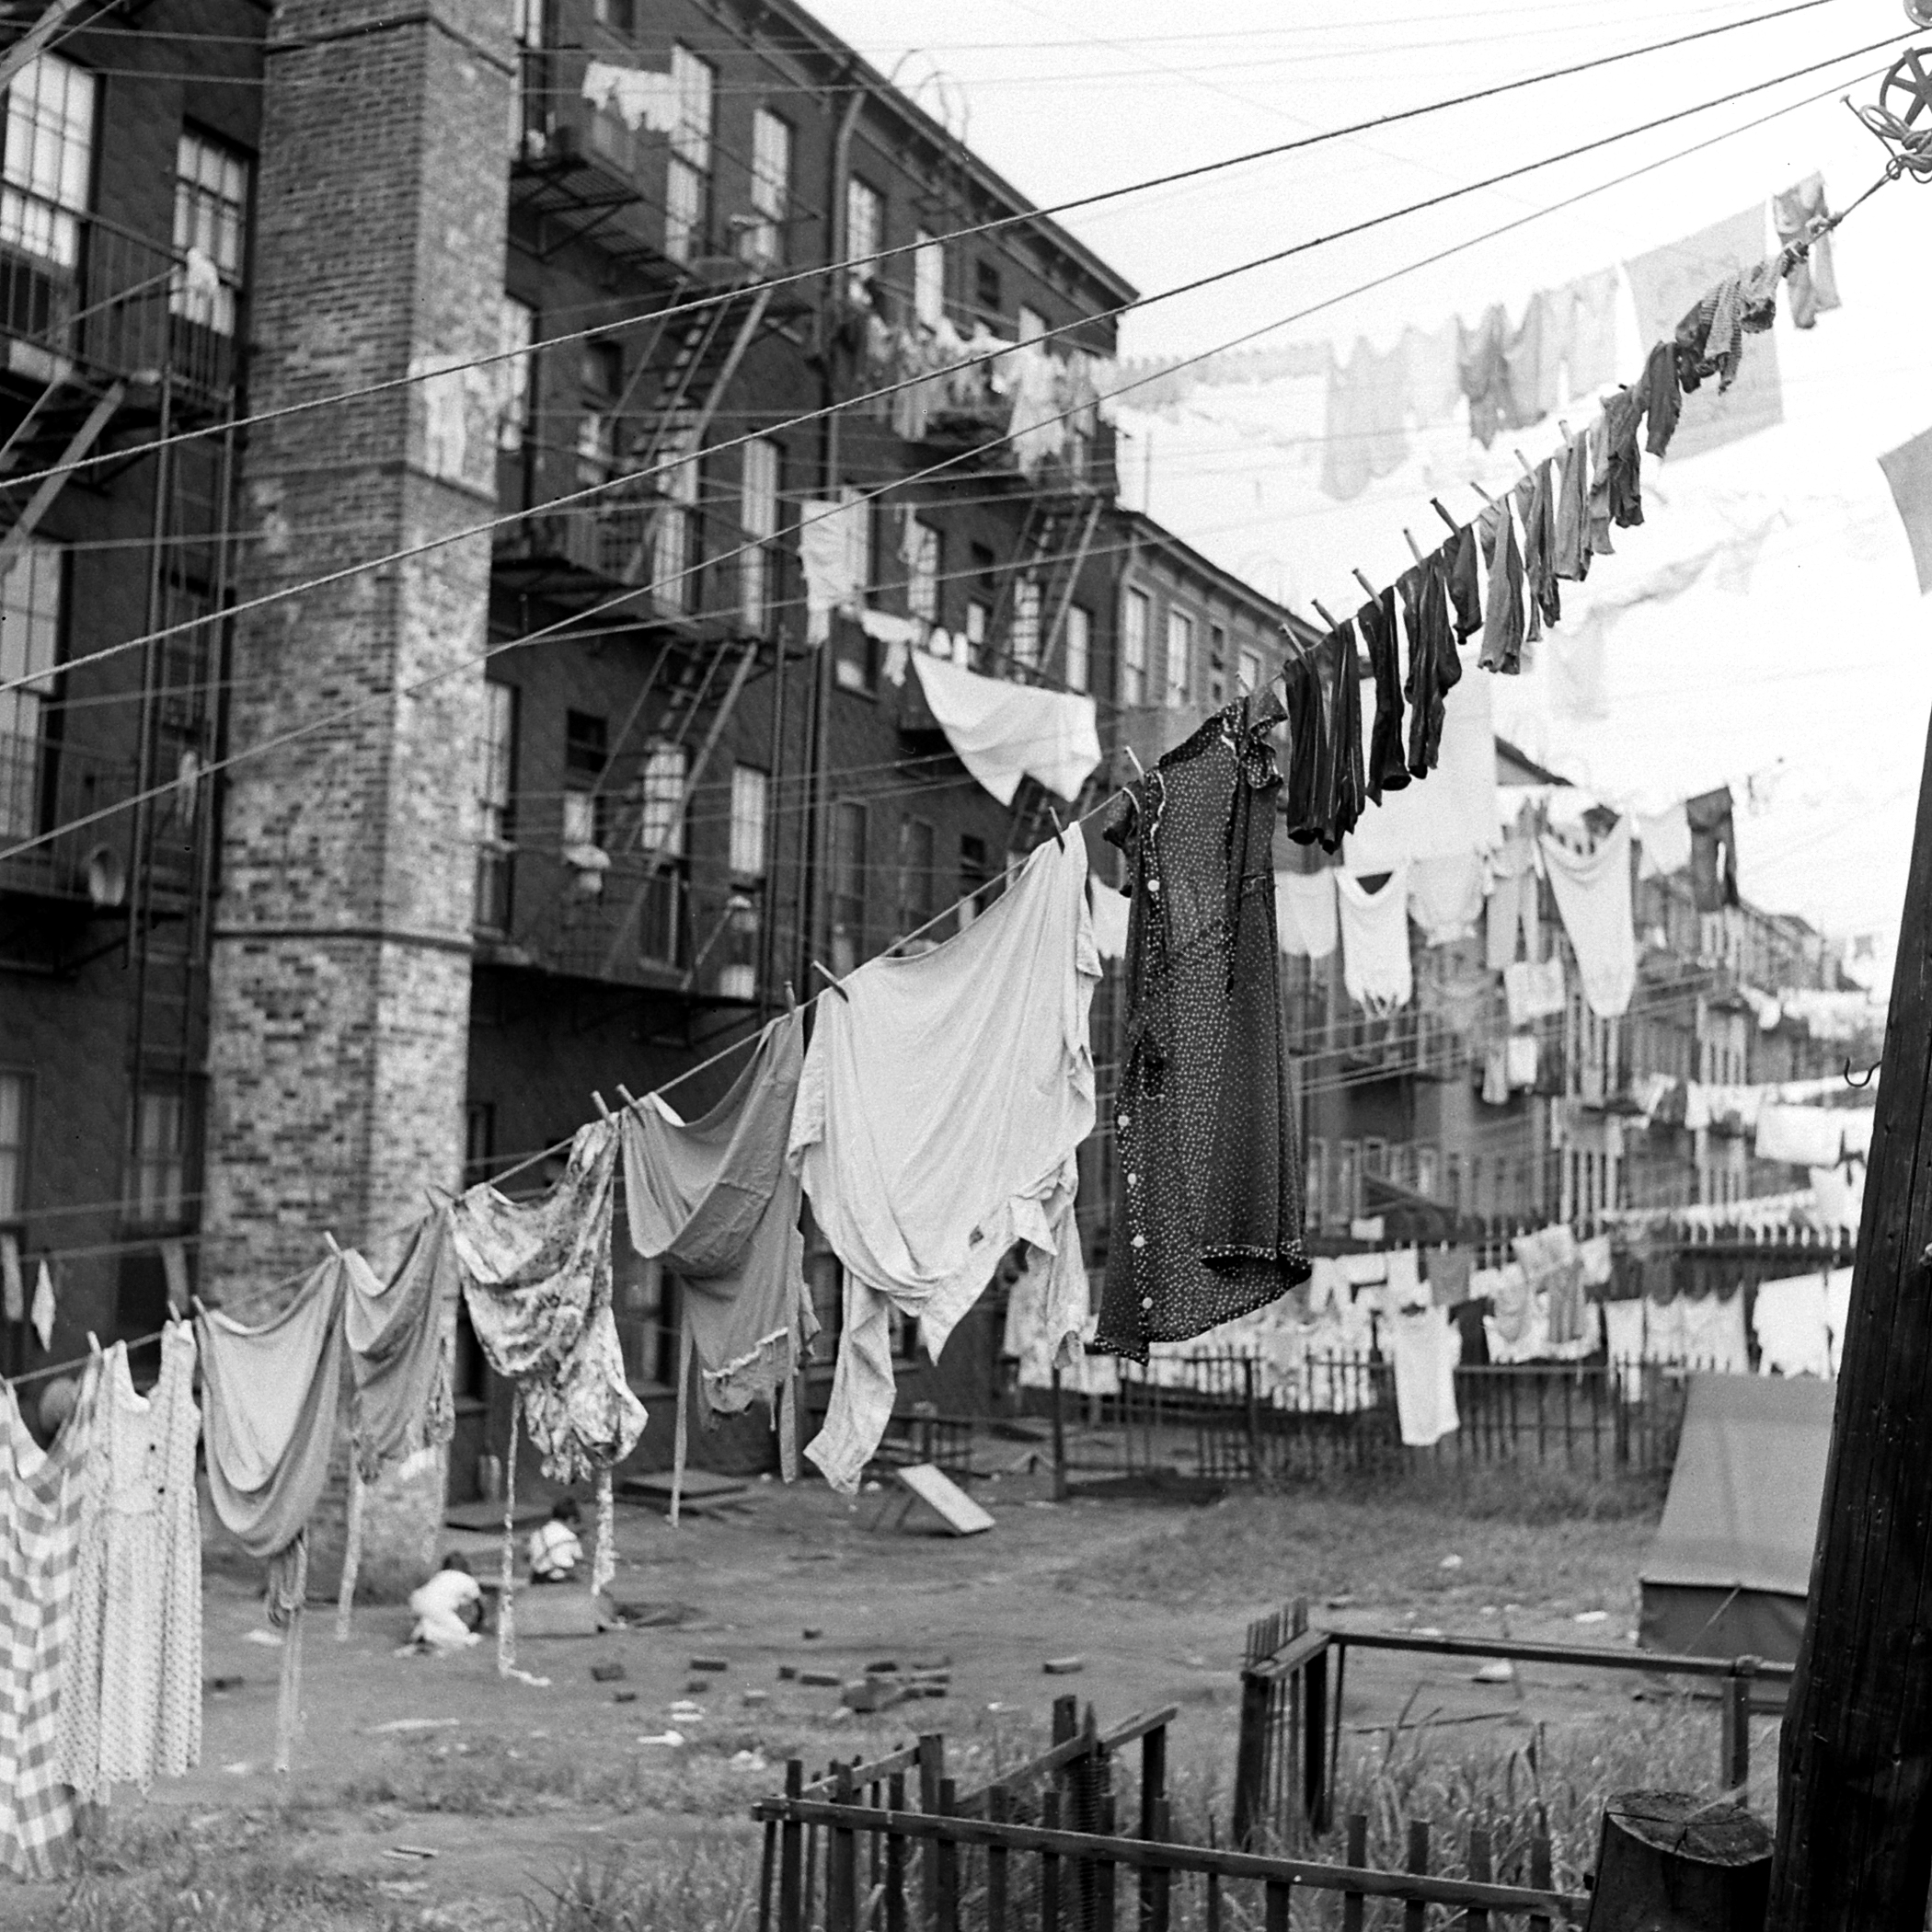 Laundry out to dry, Brooklyn, 1946.